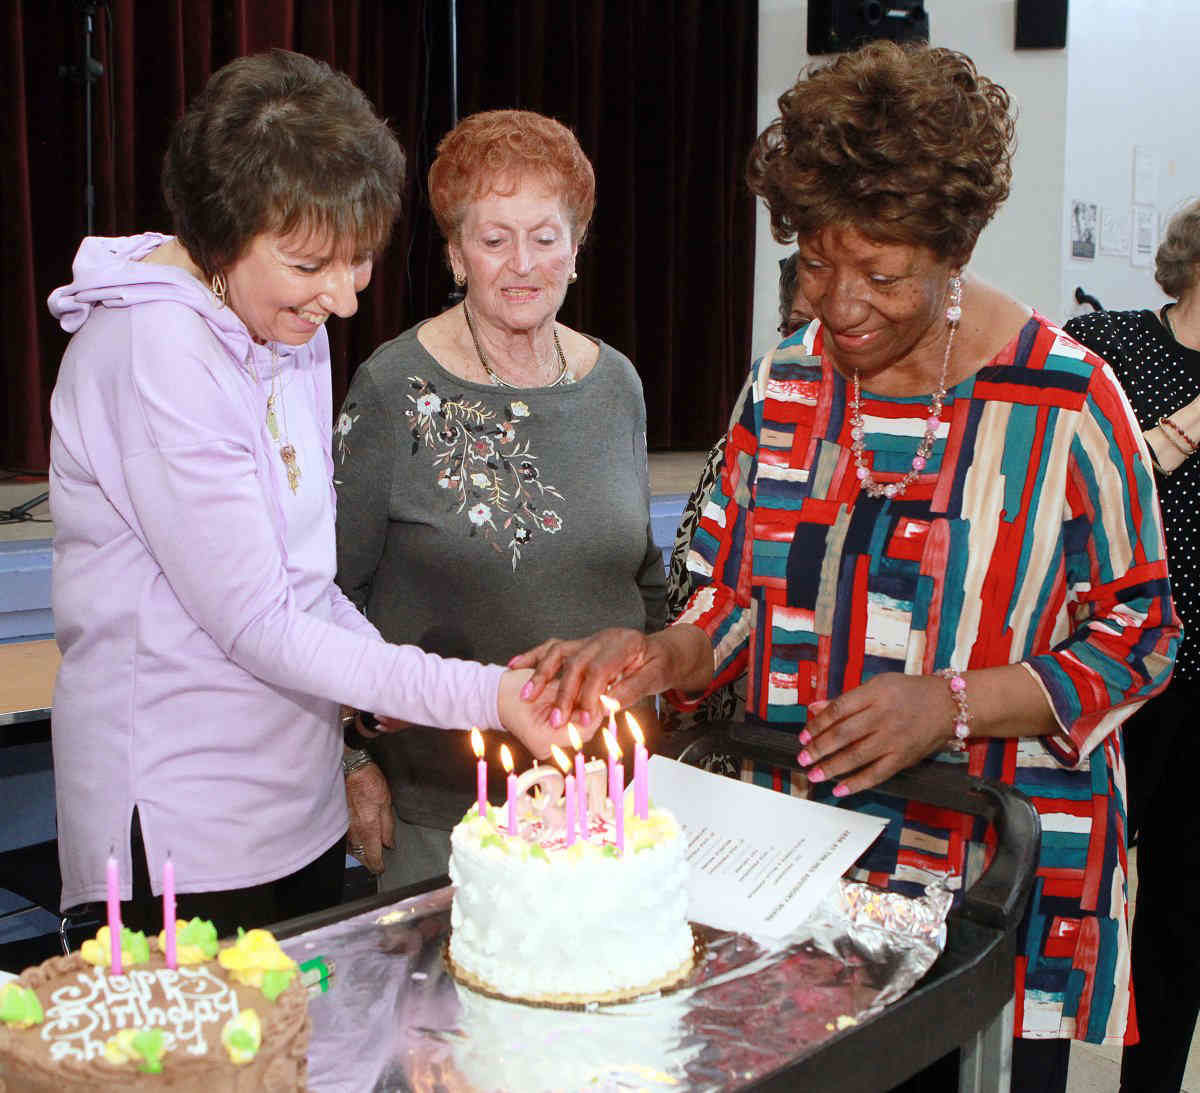 34 years young: Canarsie senior center celebrates anniversary in style